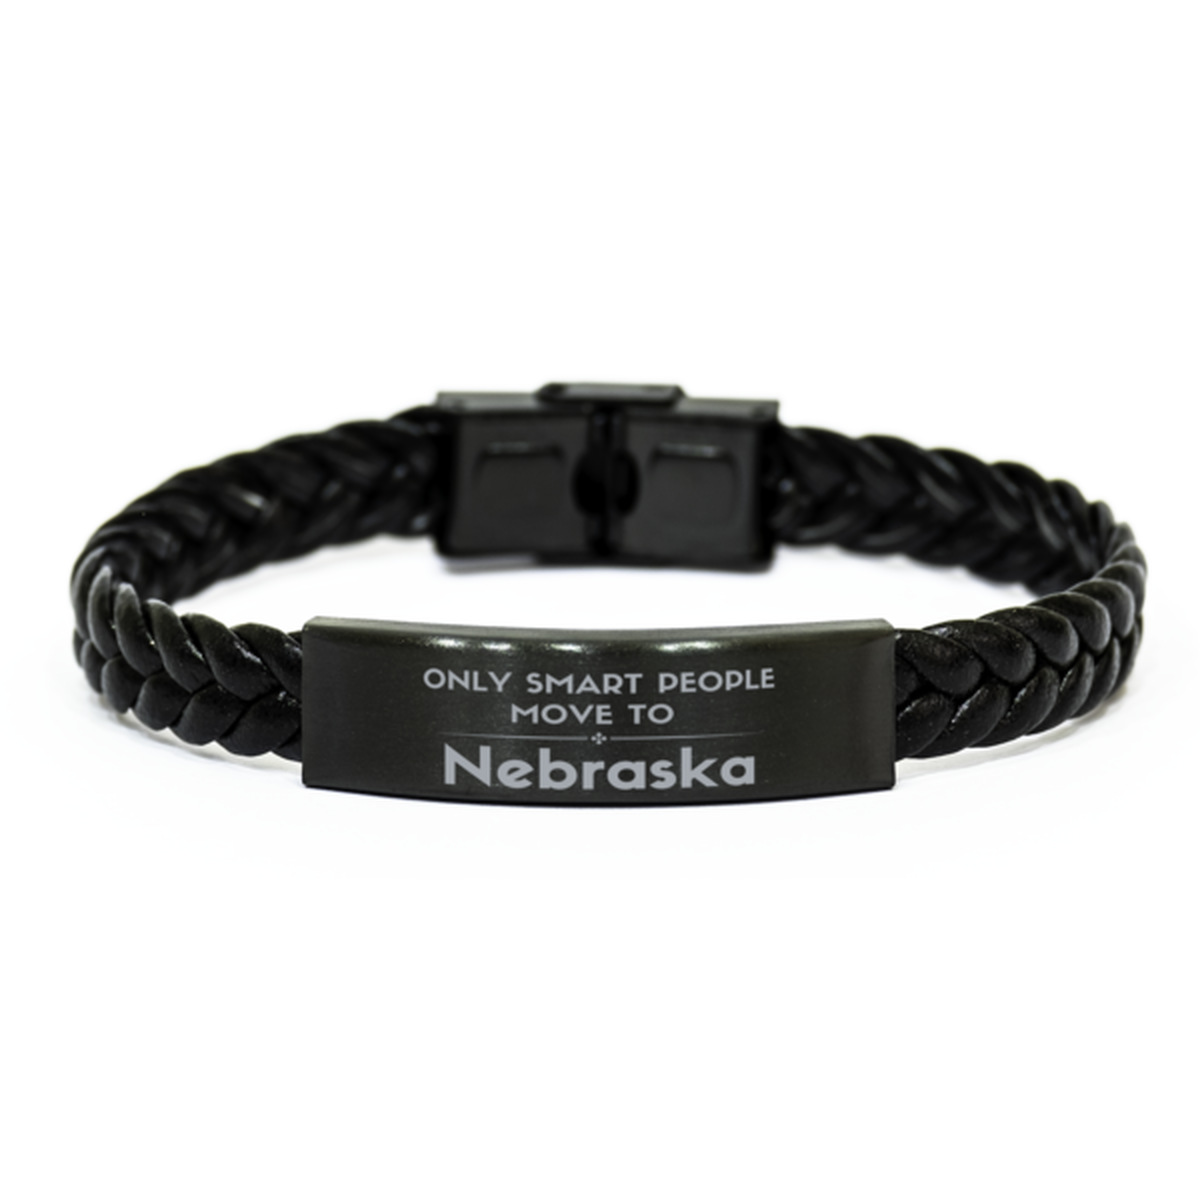 Only smart people move to Nebraska Braided Leather Bracelet, Gag Gifts For Nebraska, Move to Nebraska Gifts for Friends Coworker Funny Saying Quote